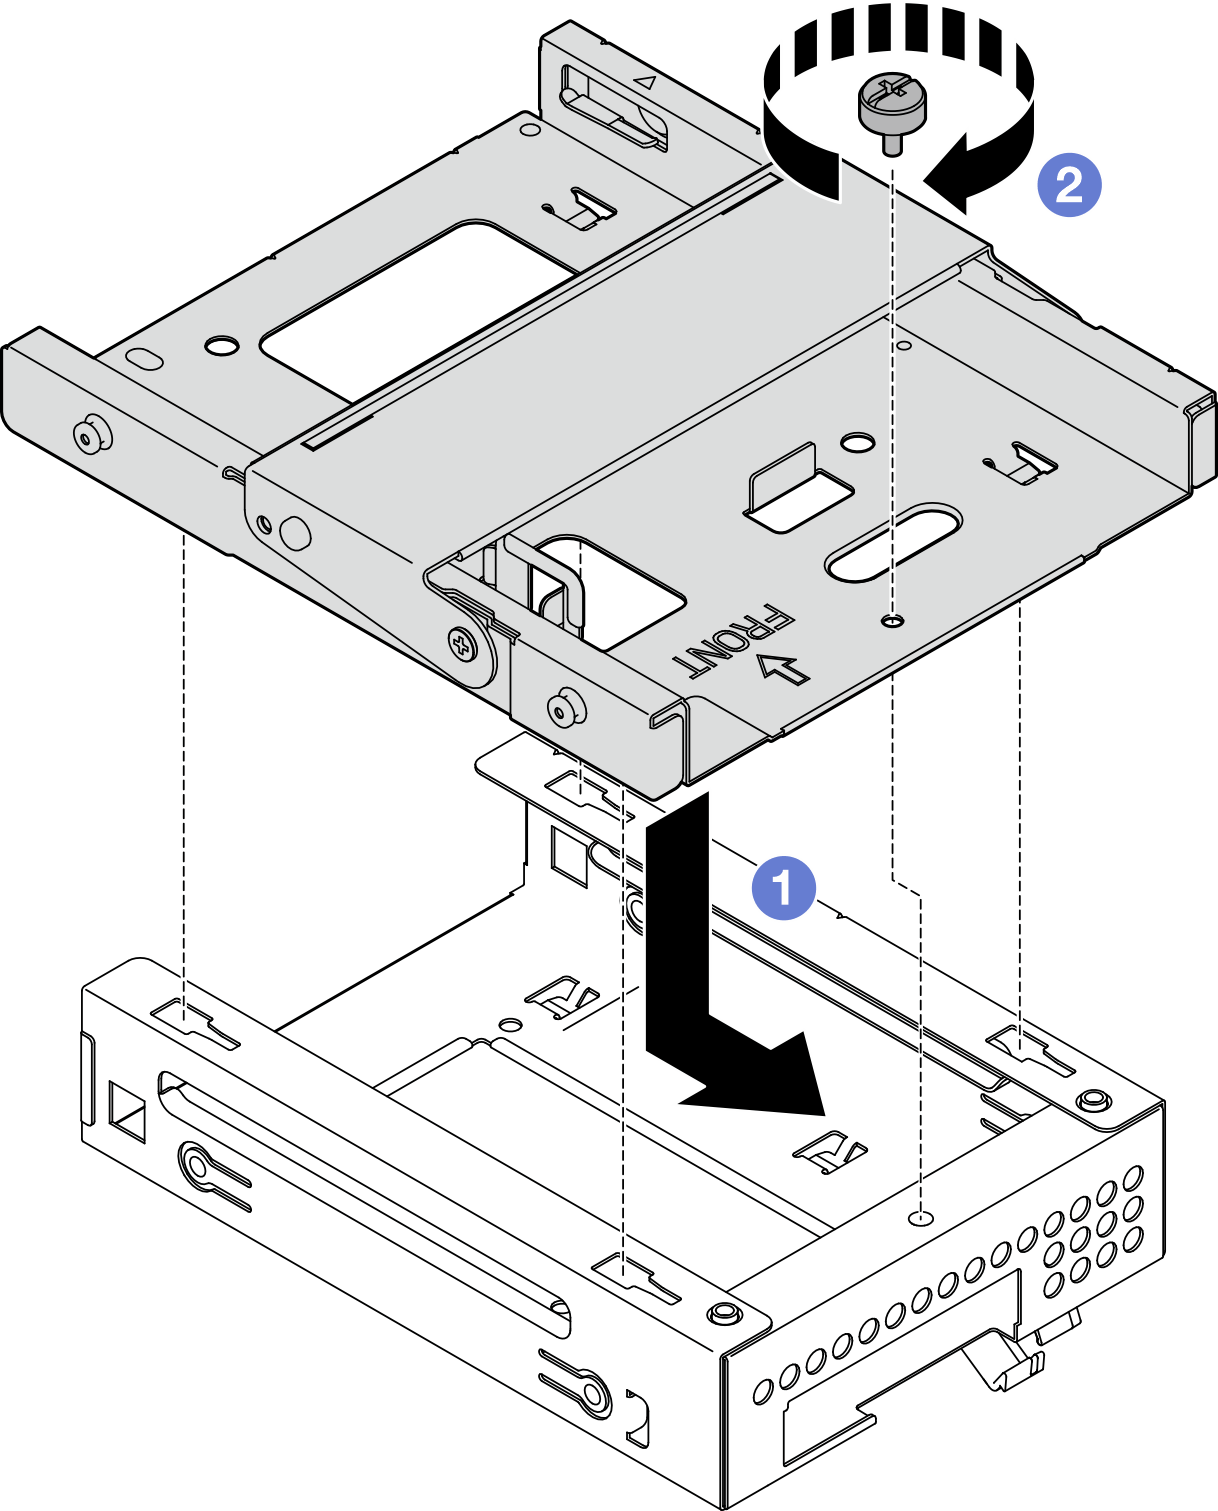 Installing the 3.5-inch drive cage to the optical drive cage